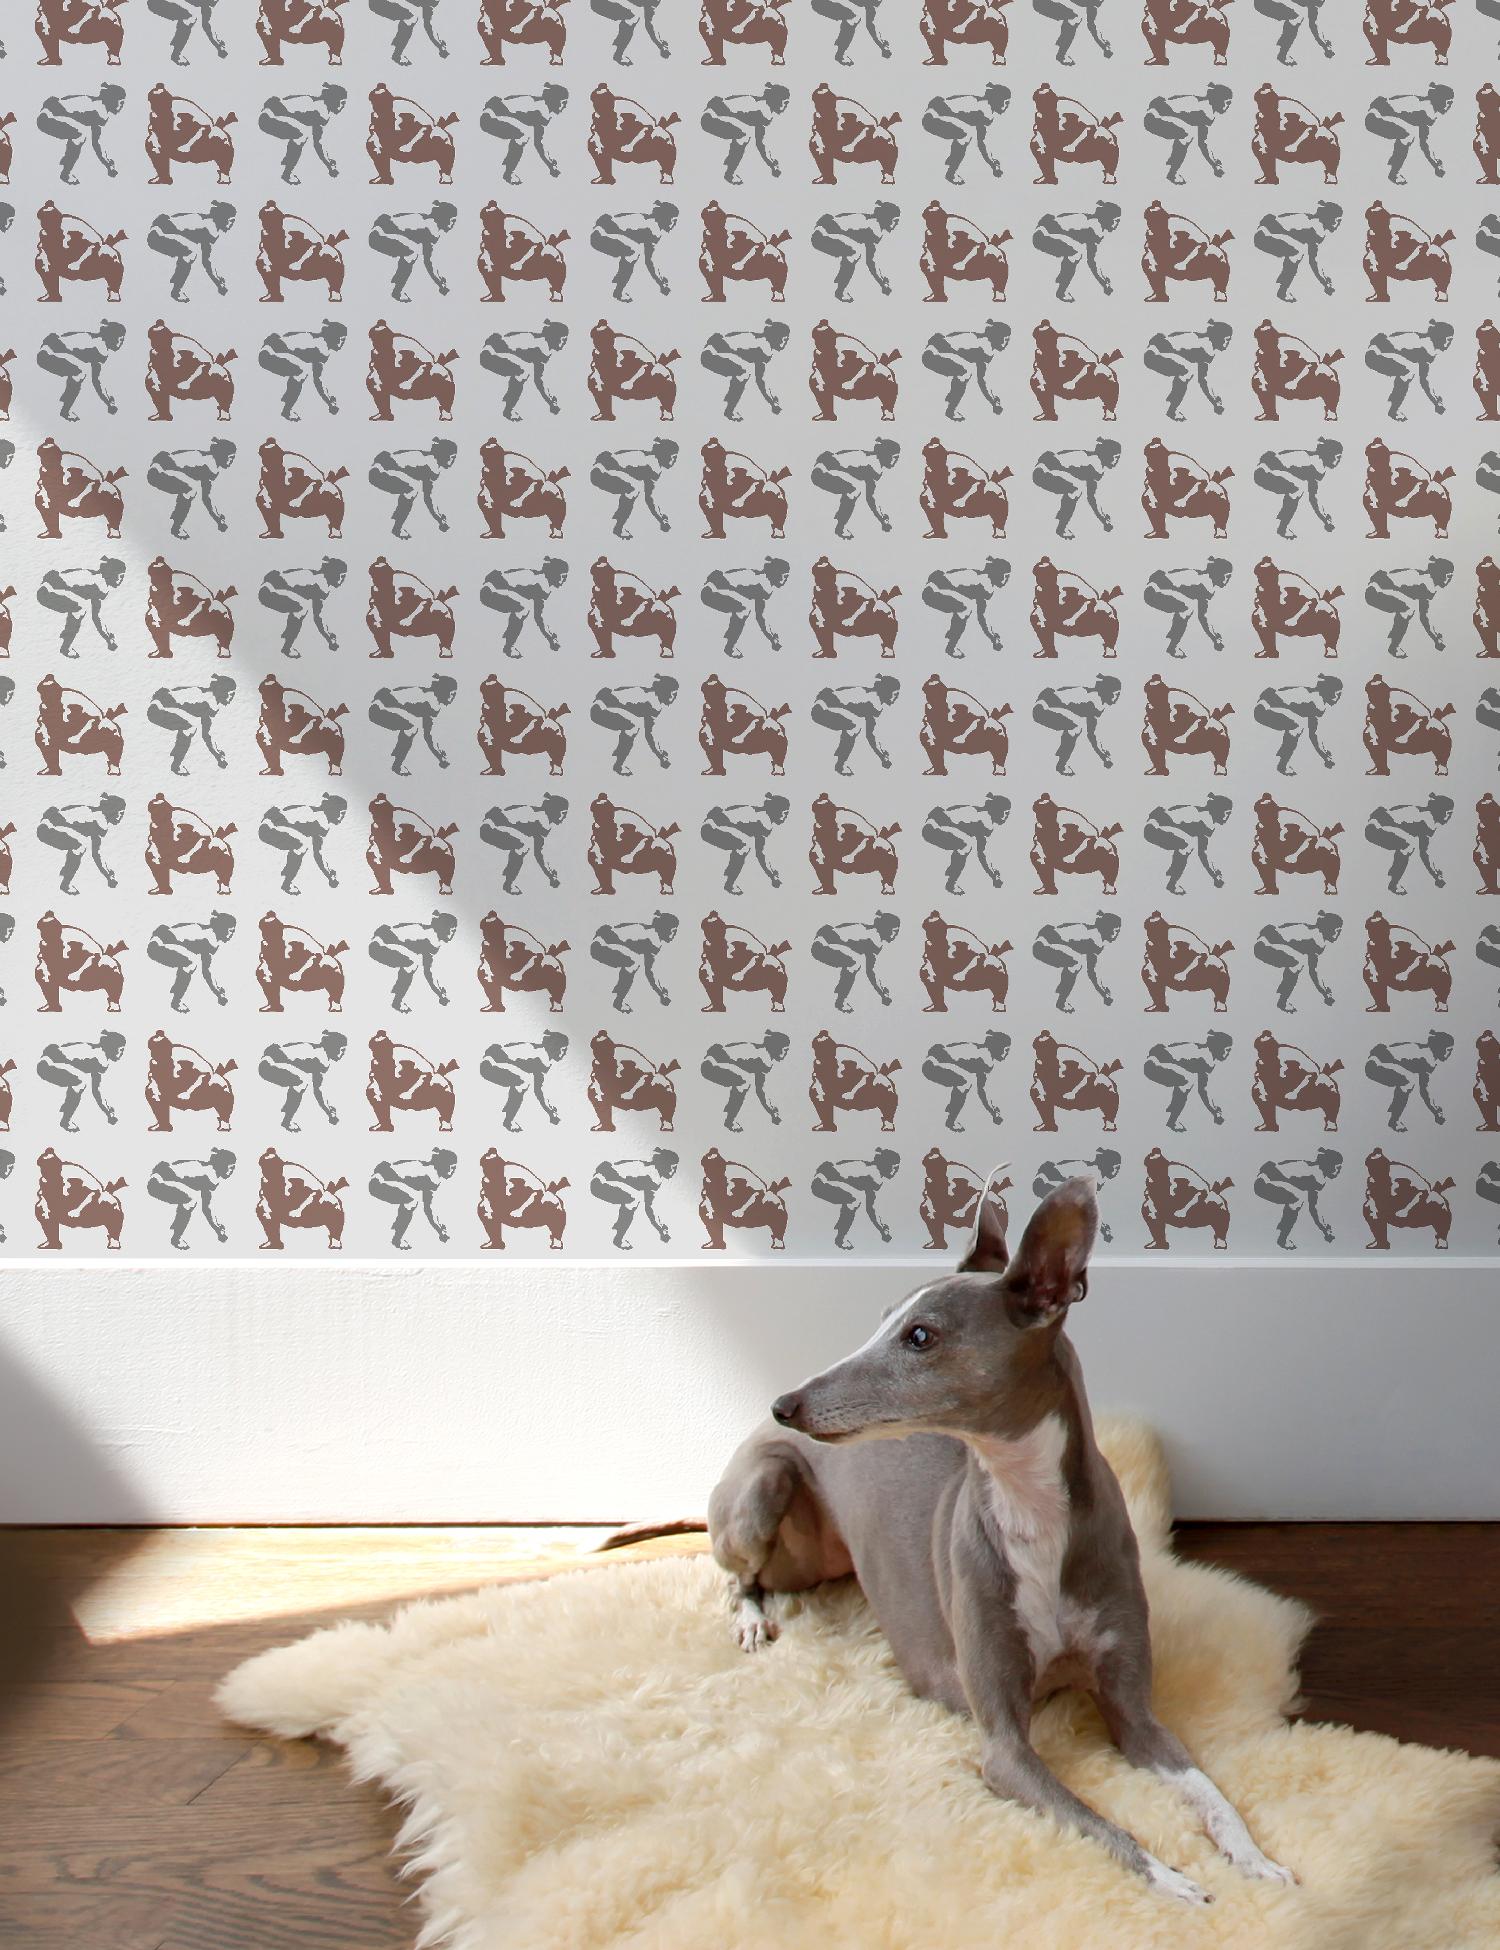 The quintessential sumo wrestling wallpaper pattern…obviously huge in Japan!

**Please note that Sumo has a 2 roll minimum order**

Samples are available for $18 including US shipping, please message us to purchase.  

Printing: Screen-printed by